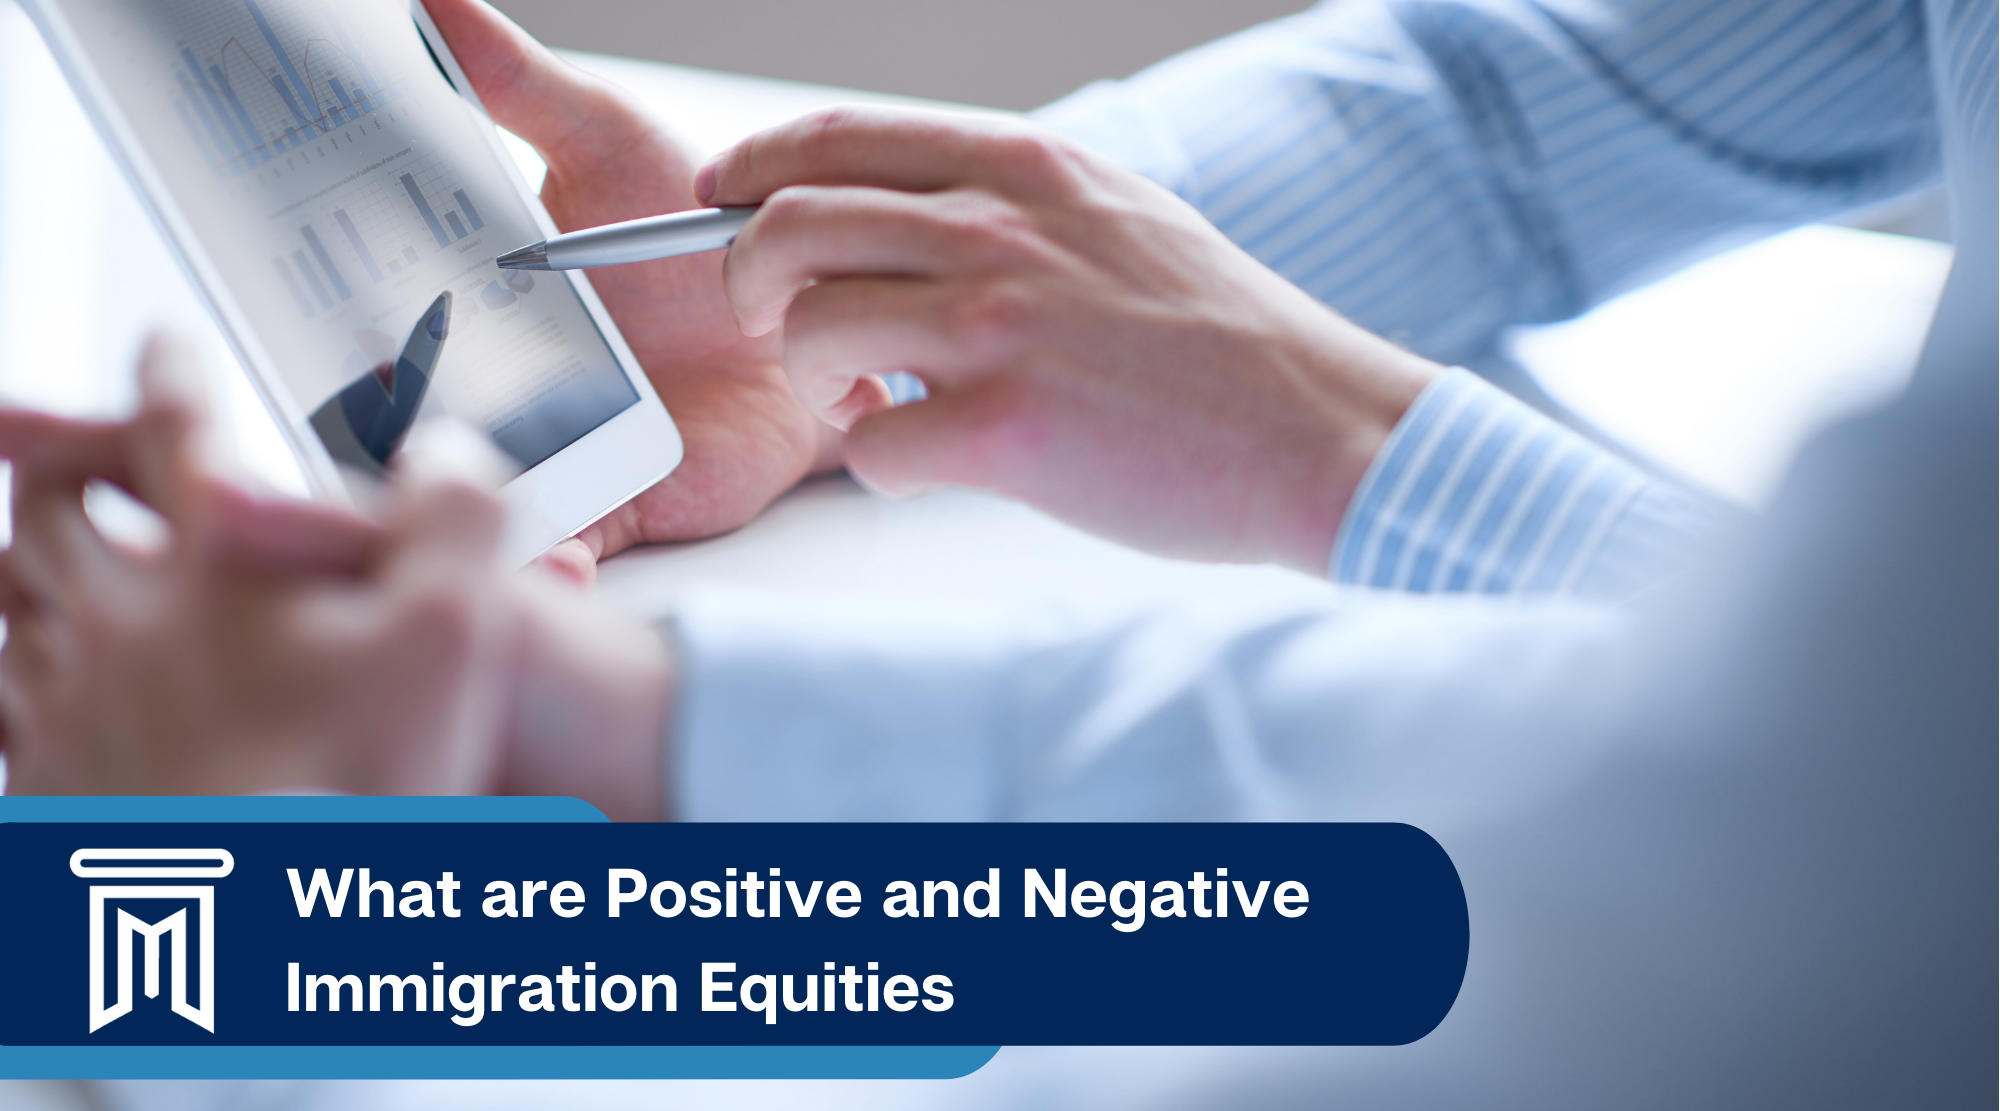 What are positive and negative immigration equities